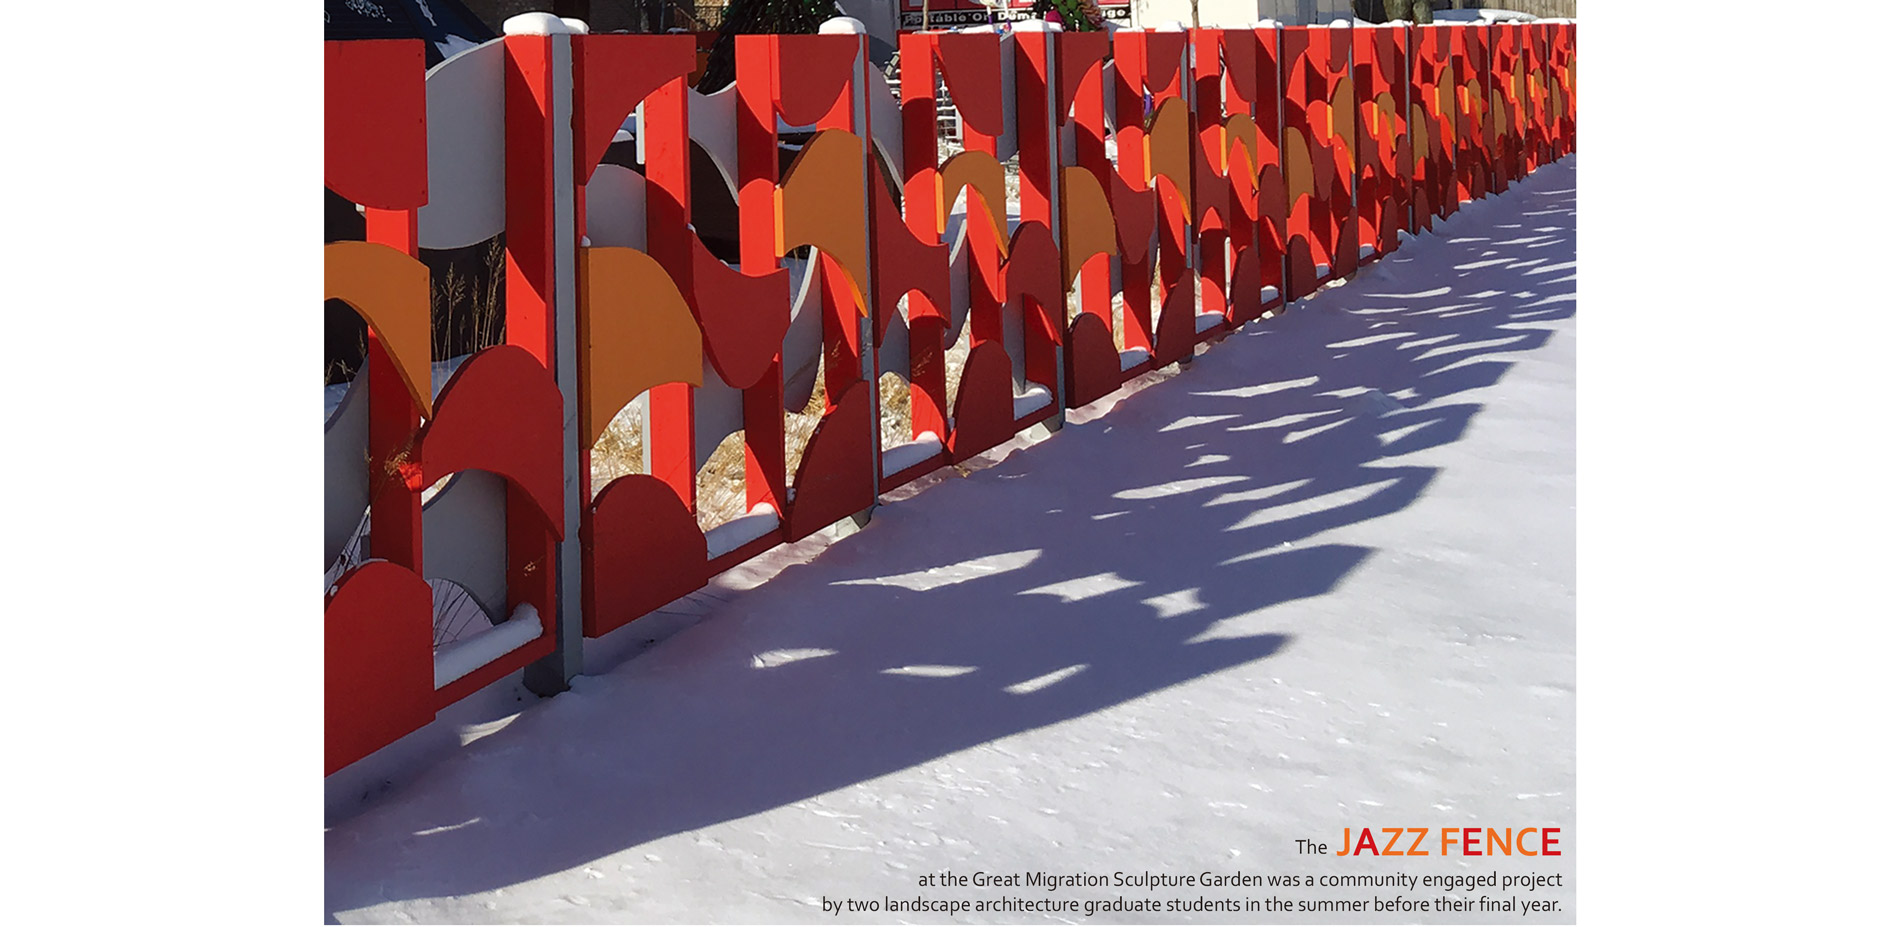  The Jazz Fence encloses the Great Migration Sculpture Garden which commemorates the experience of African-American people moving from the South to th…